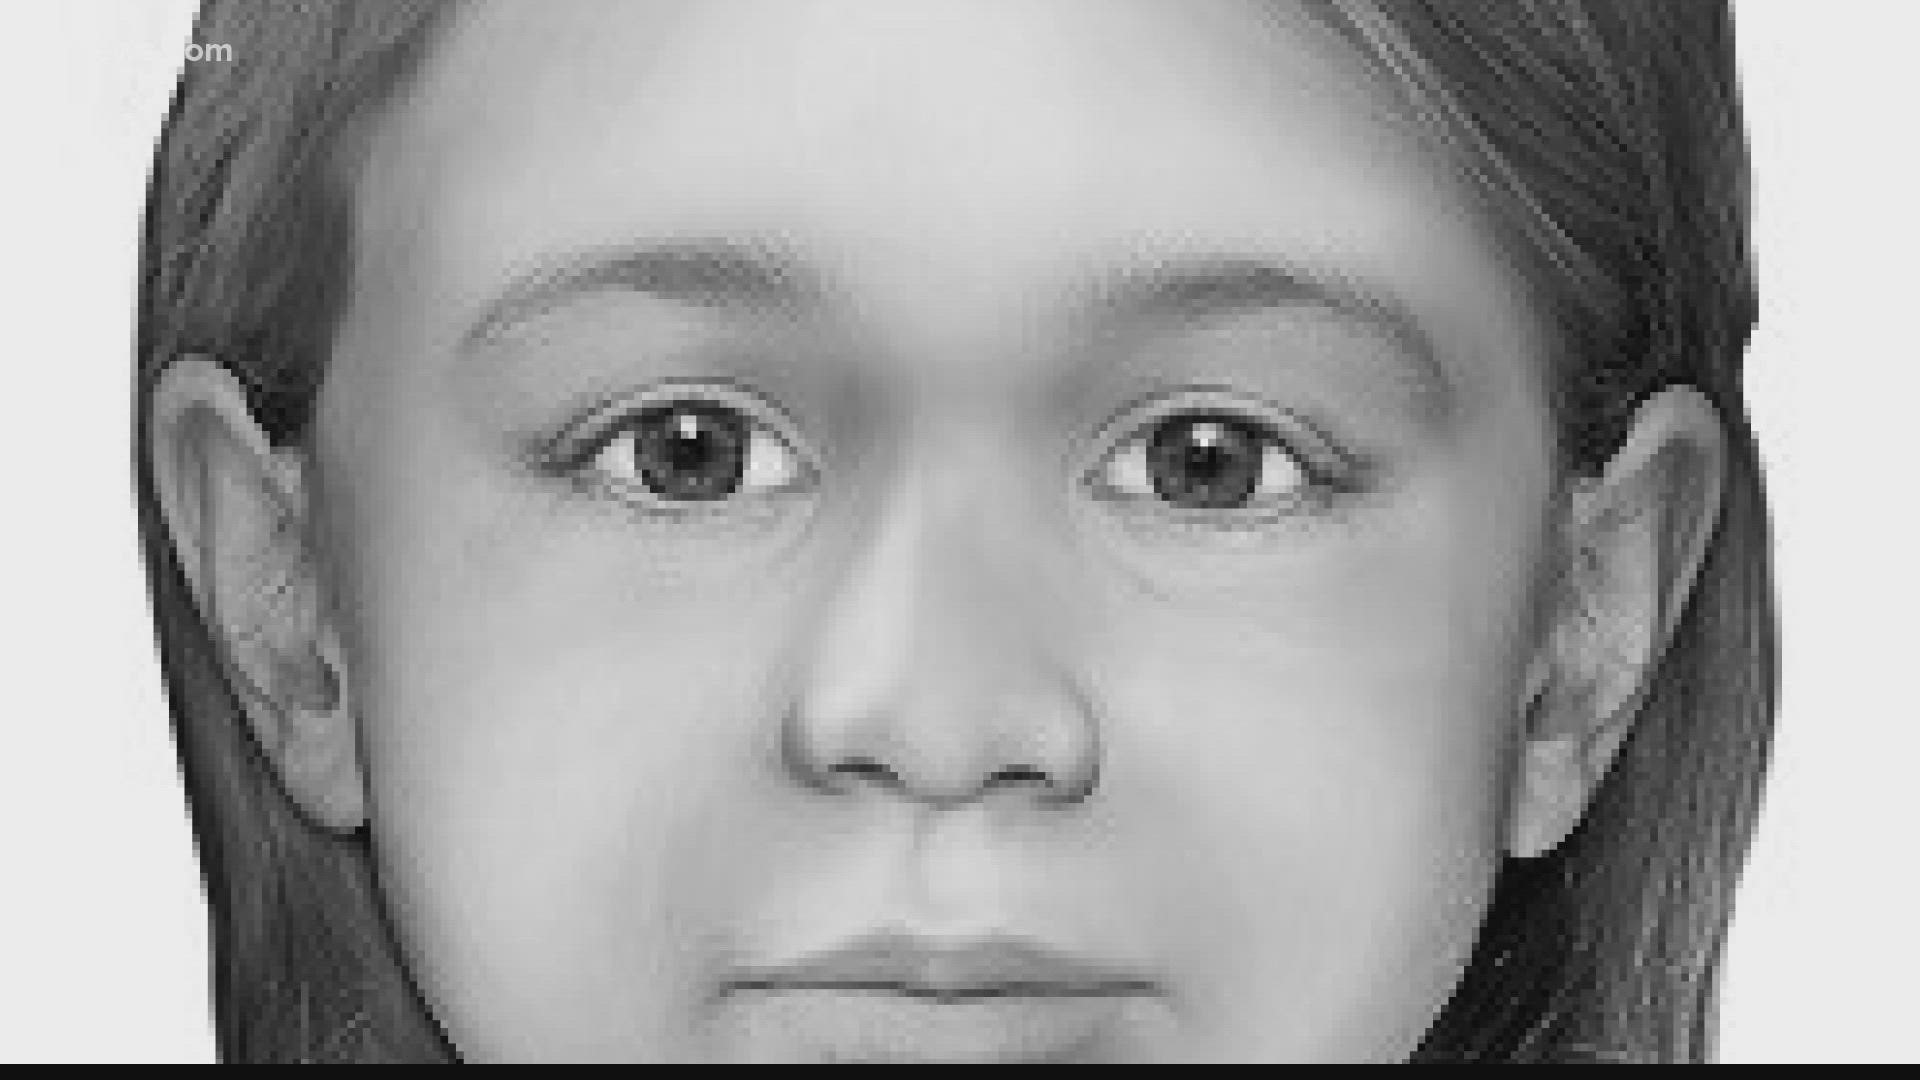 Officials are still looking for help to identify the remains of a young girl found in the desert in 1960.